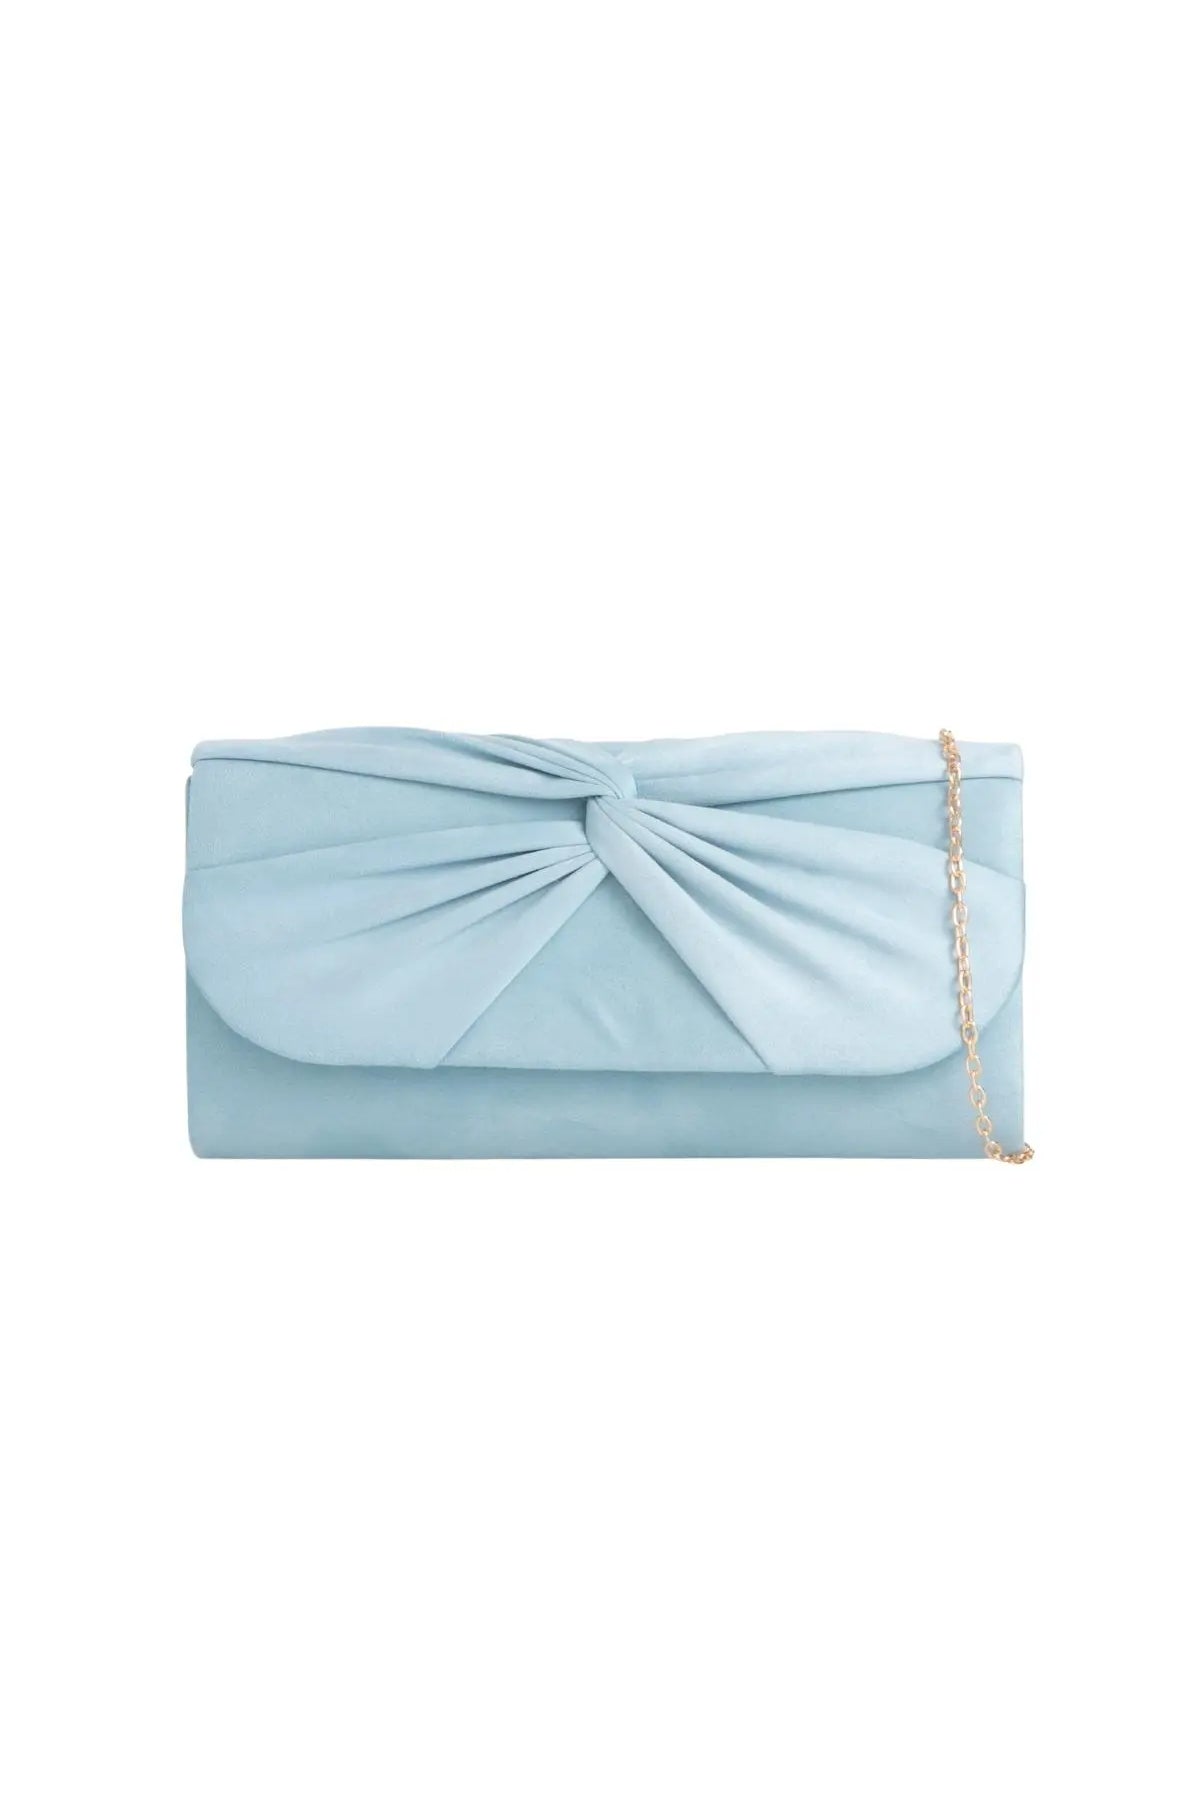 Light Blue Suede Clutch Bag with Knot Detail